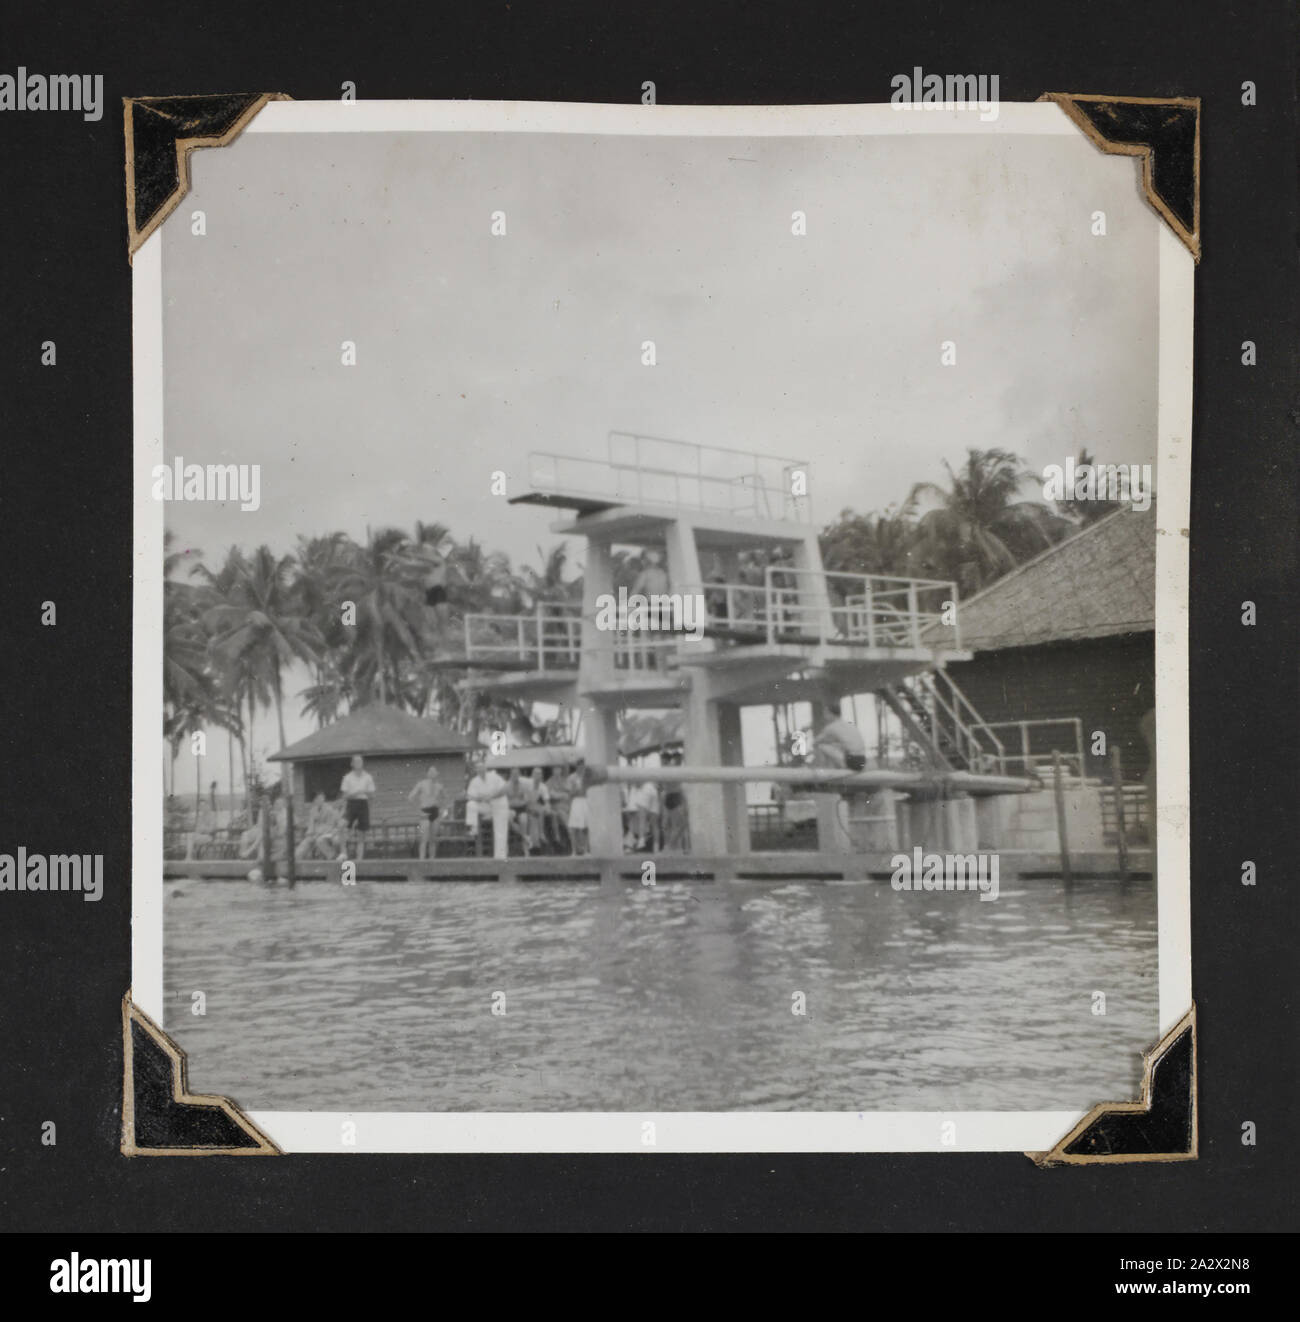 Photograph - 'Diving Platform Seletar', Singapore, 1941, Black and white photograph of the diving platform at the RAF base in Seletar, Singapore. One of 116 photographs in a photographic album held by Pilot Officer Colin Keon-Cohen. These are very good images of life in Singapore with 205 Sqn RAF, then 77 Sqn RAAF, World War II era Stock Photo